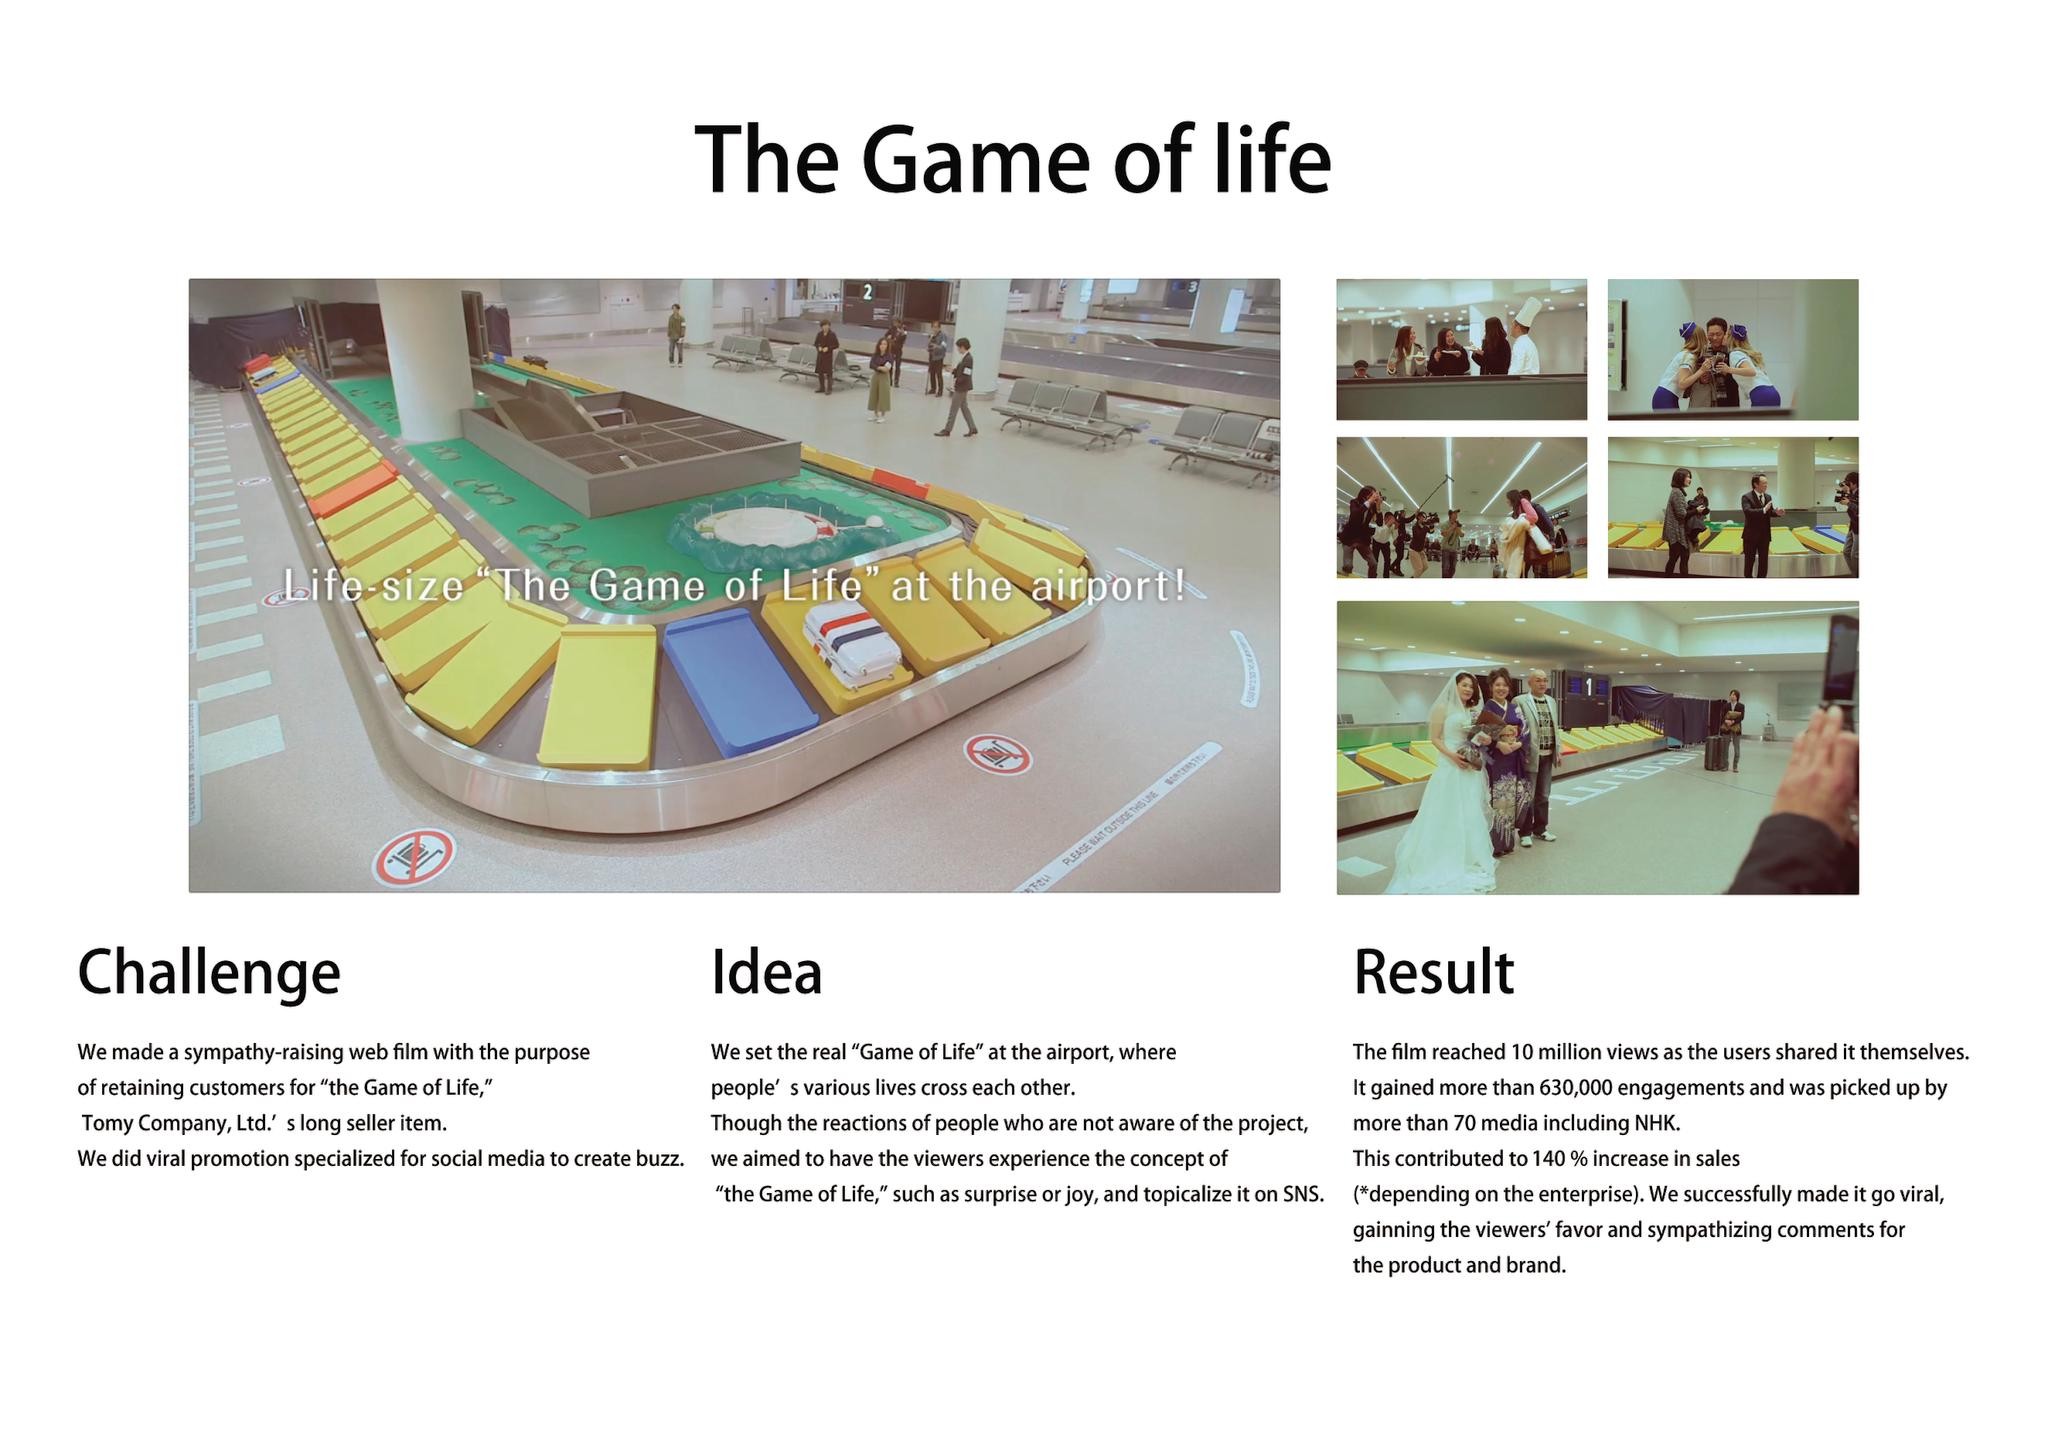 Life-size “The Game of life” at the airport